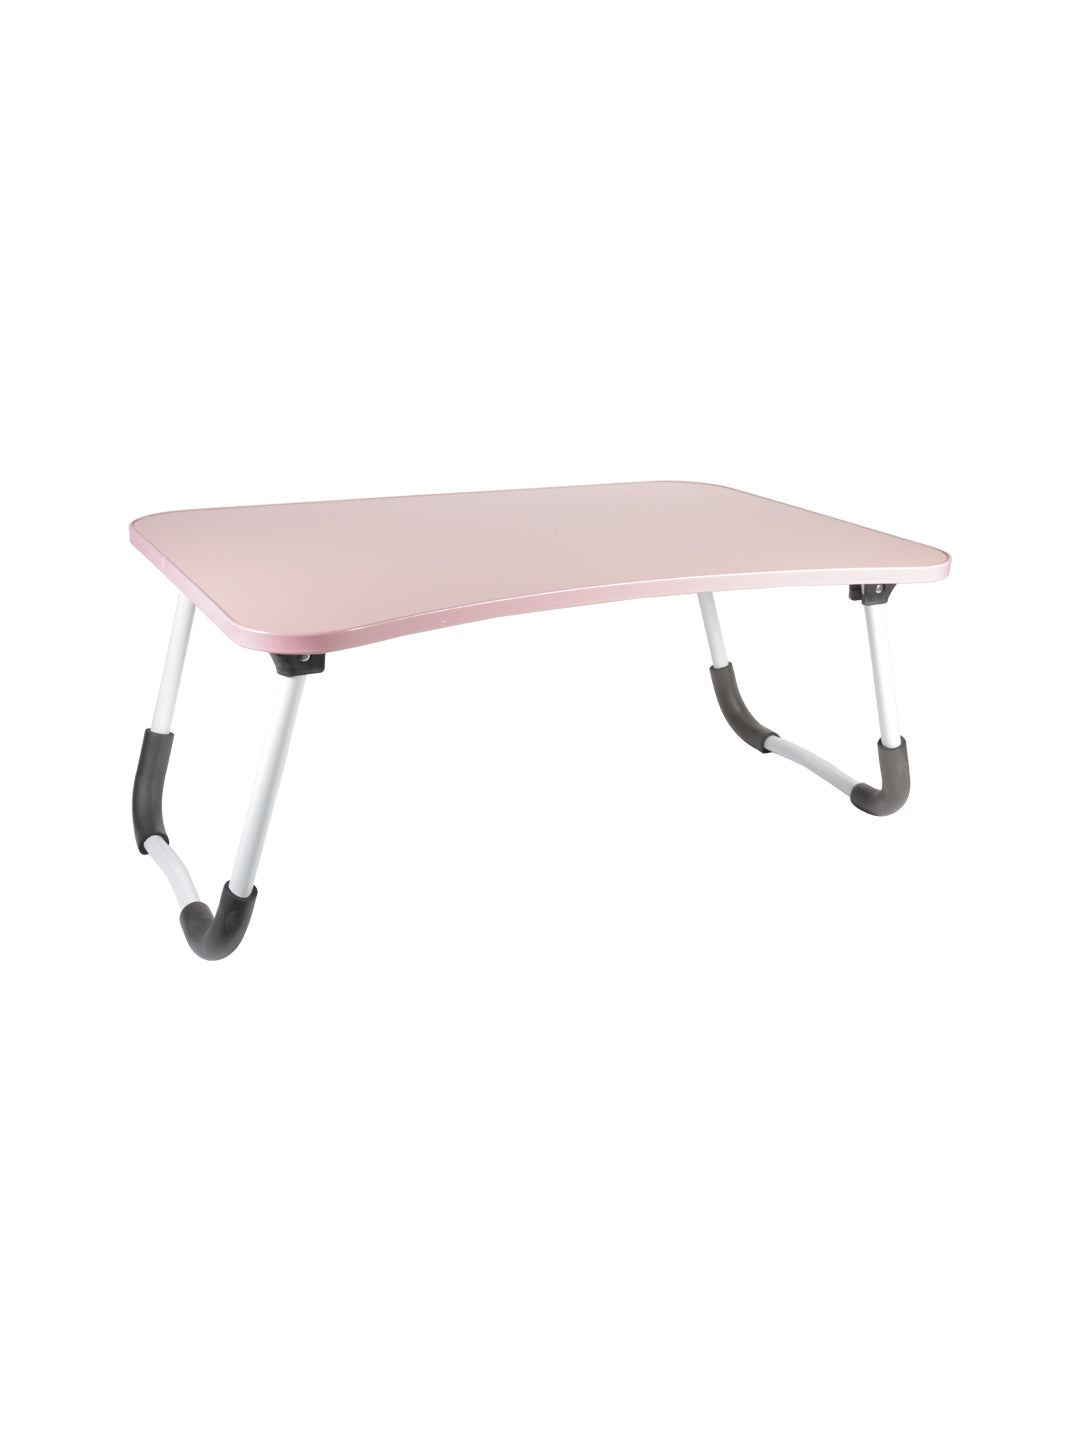 VON CASA Foldable And Portable Wooden Laptop Table - Pink